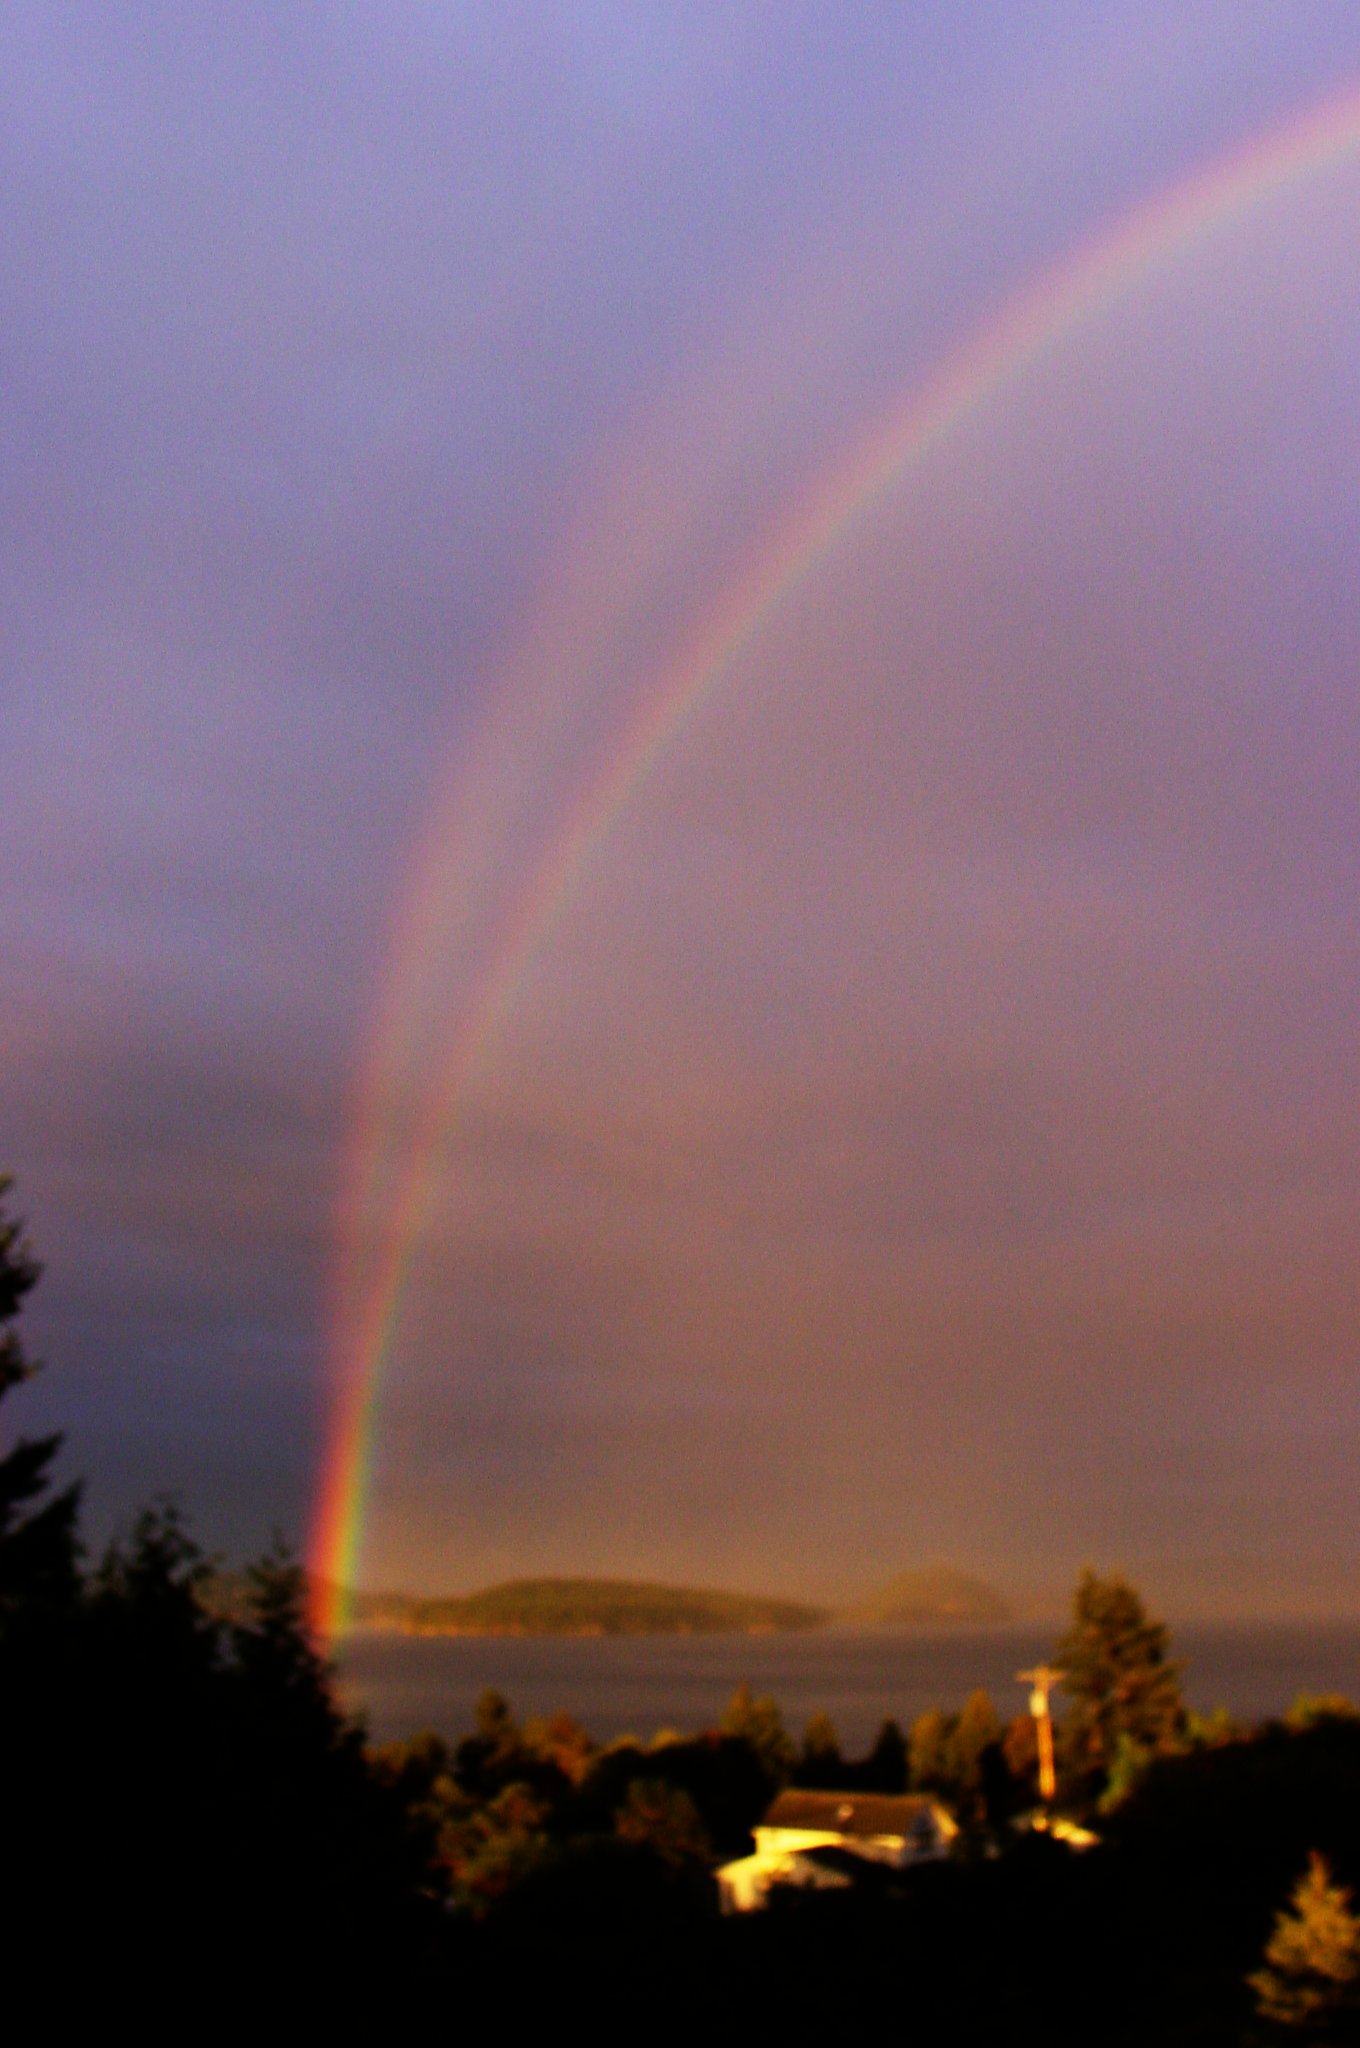 A typical rainbow with one next to it pointing upwards towards the sky.